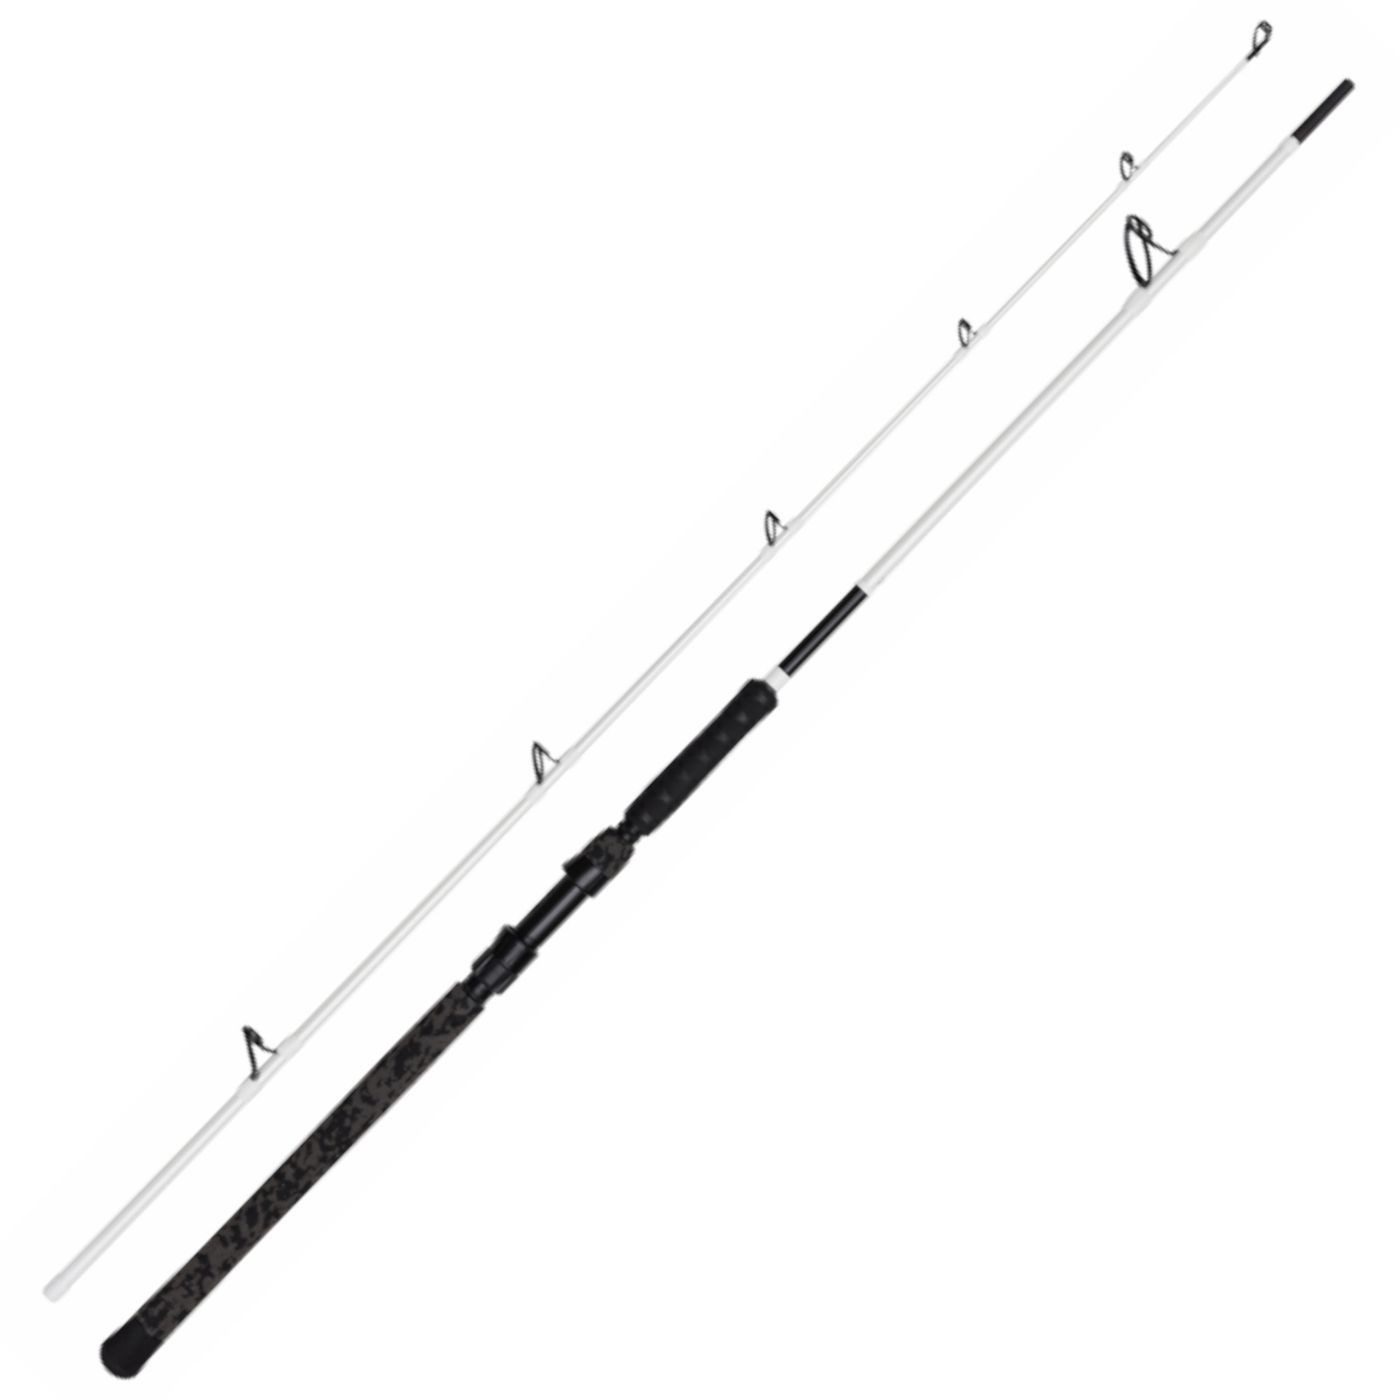 MADCAT Grundrute Madcat White Deluxe 3,20m 150-350g - Wallerrute